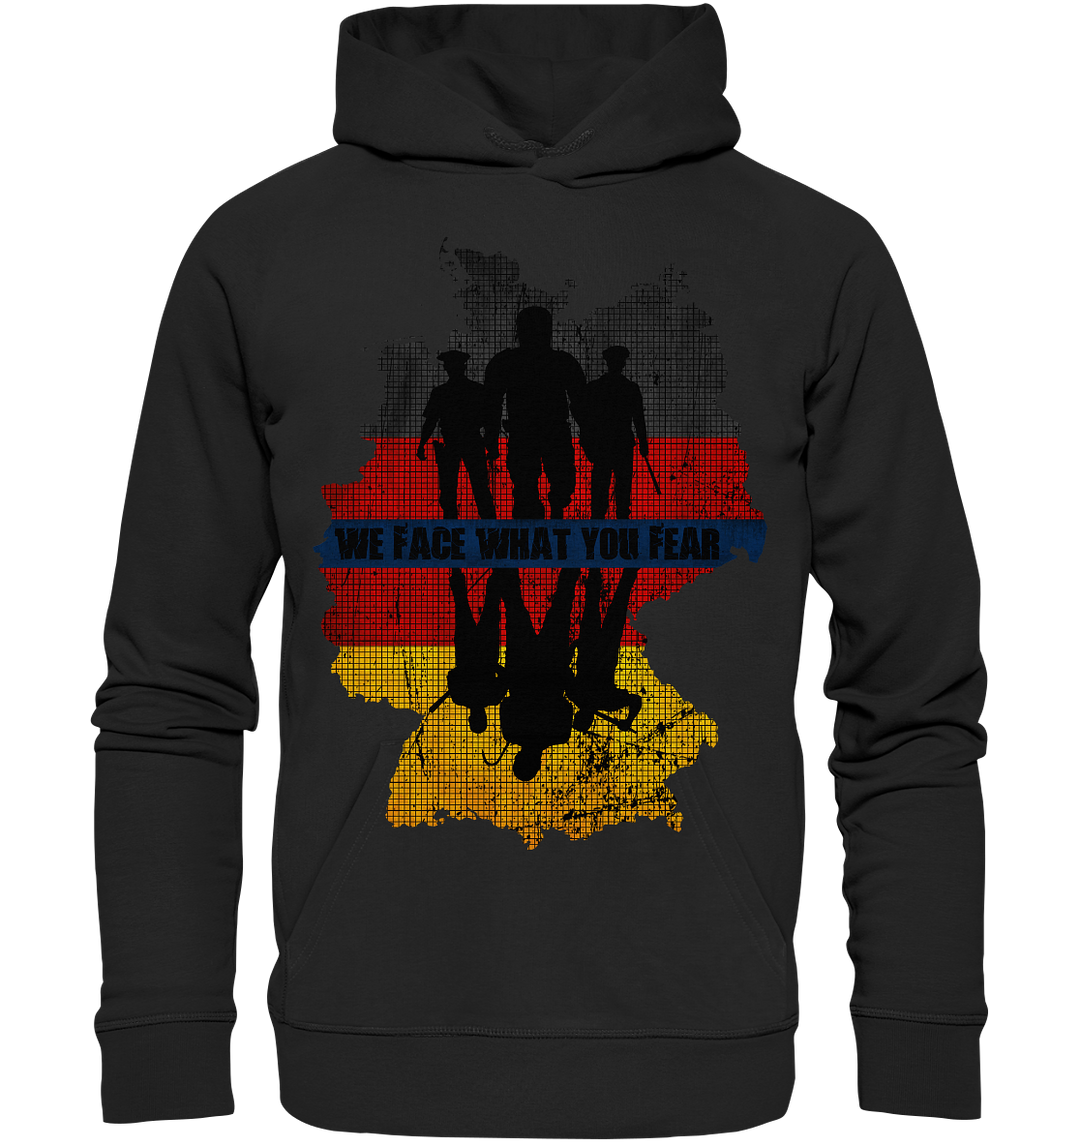 "We Face What You Fear" - Premium Unisex Hoodie